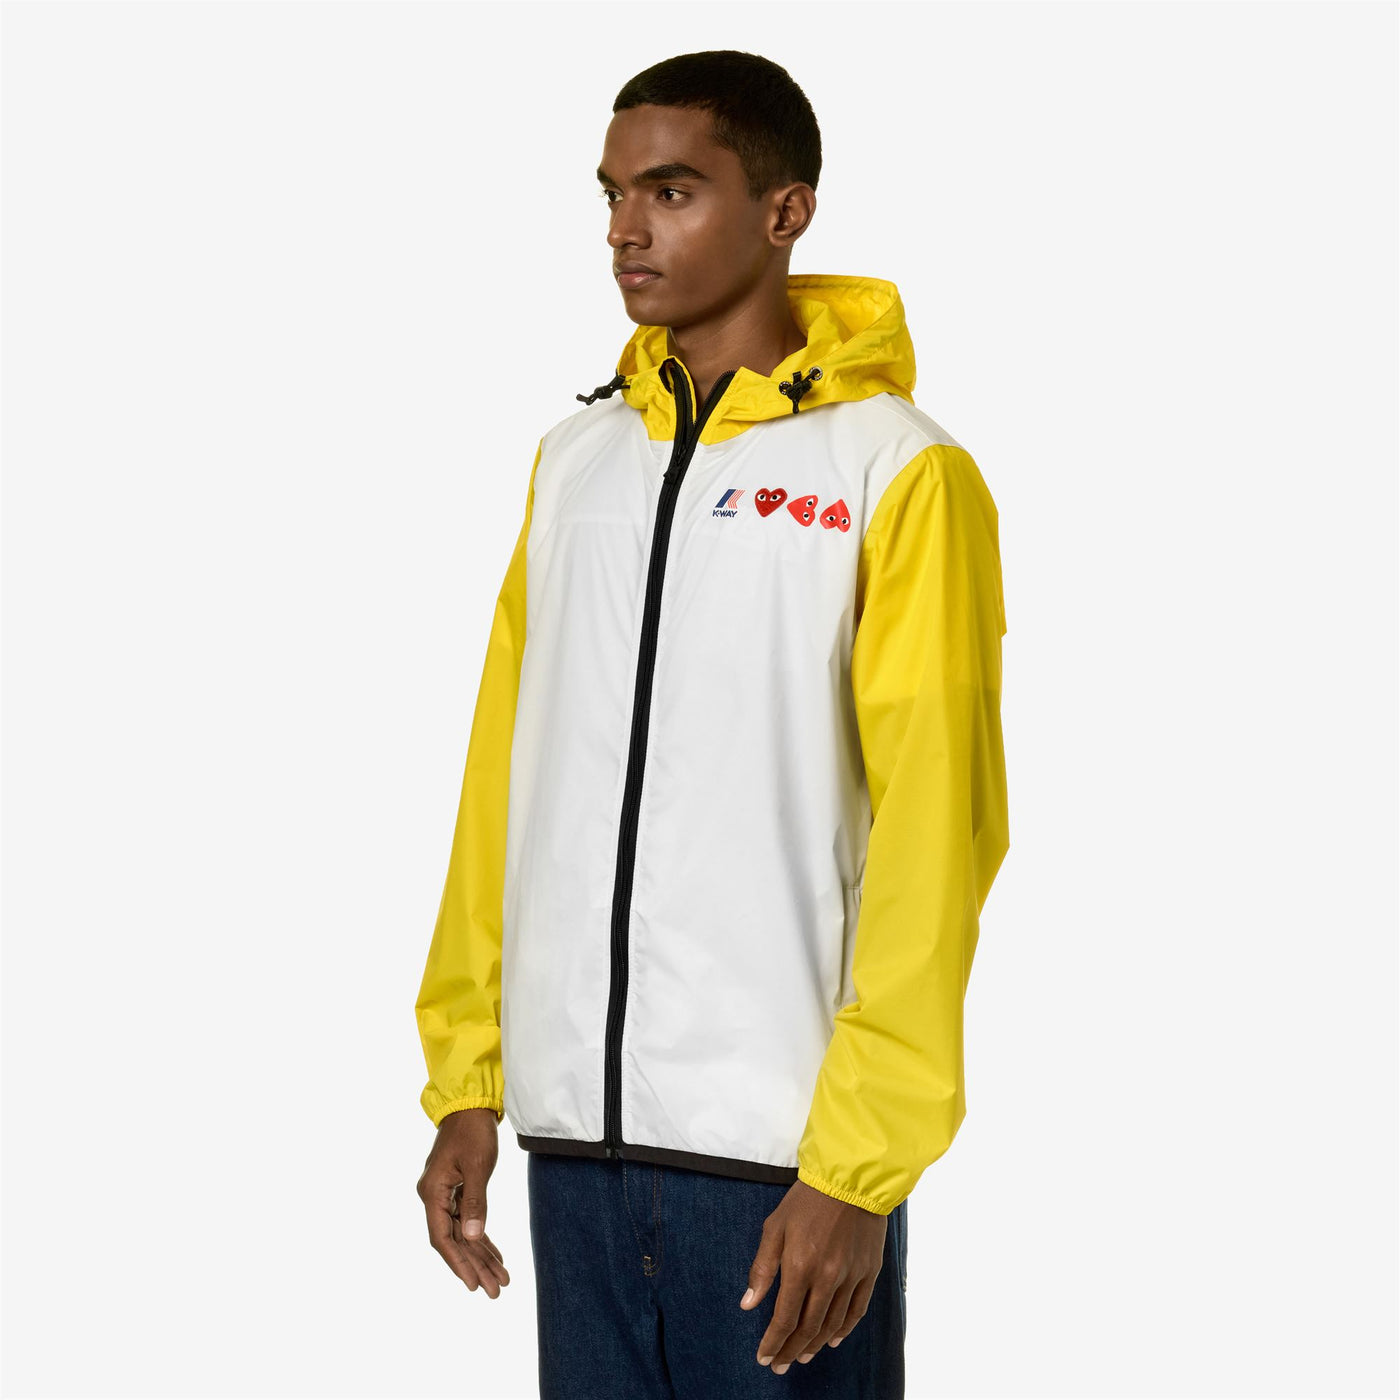 Jackets Unisex LE VRAI 3.0 CLAUDE CDG OPEN US OF SURFING BICOLOR Mid WHITE - YELLOW DK Detail (jpg Rgb)			